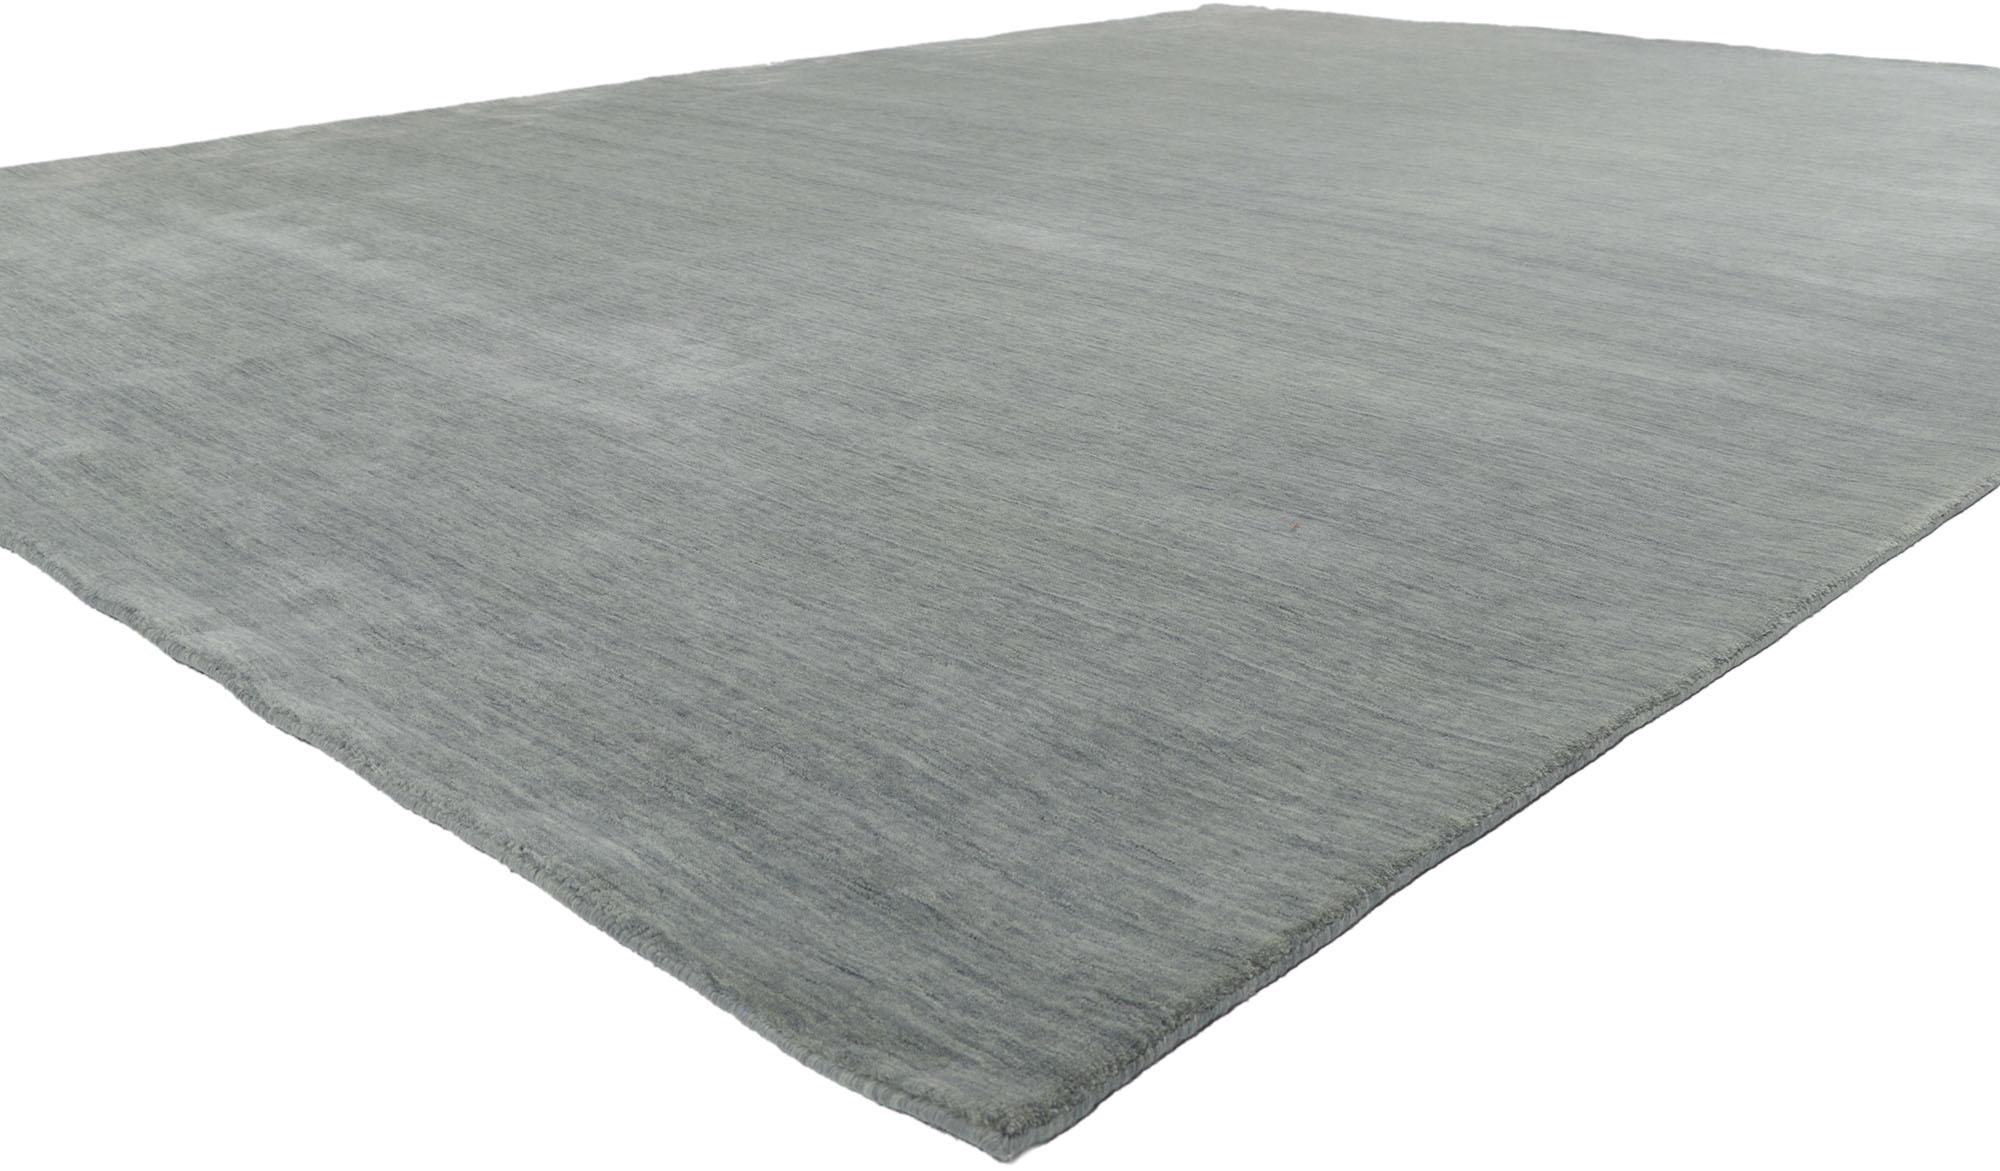 30738 New Contemporary grey area rug with Modern Style 009'10 x 13'00. Effortless beauty combined with simplicity and modern style, this hand-loom wool contemporary Indian rug provides a feeling of cozy contentment without the clutter. Imbued with